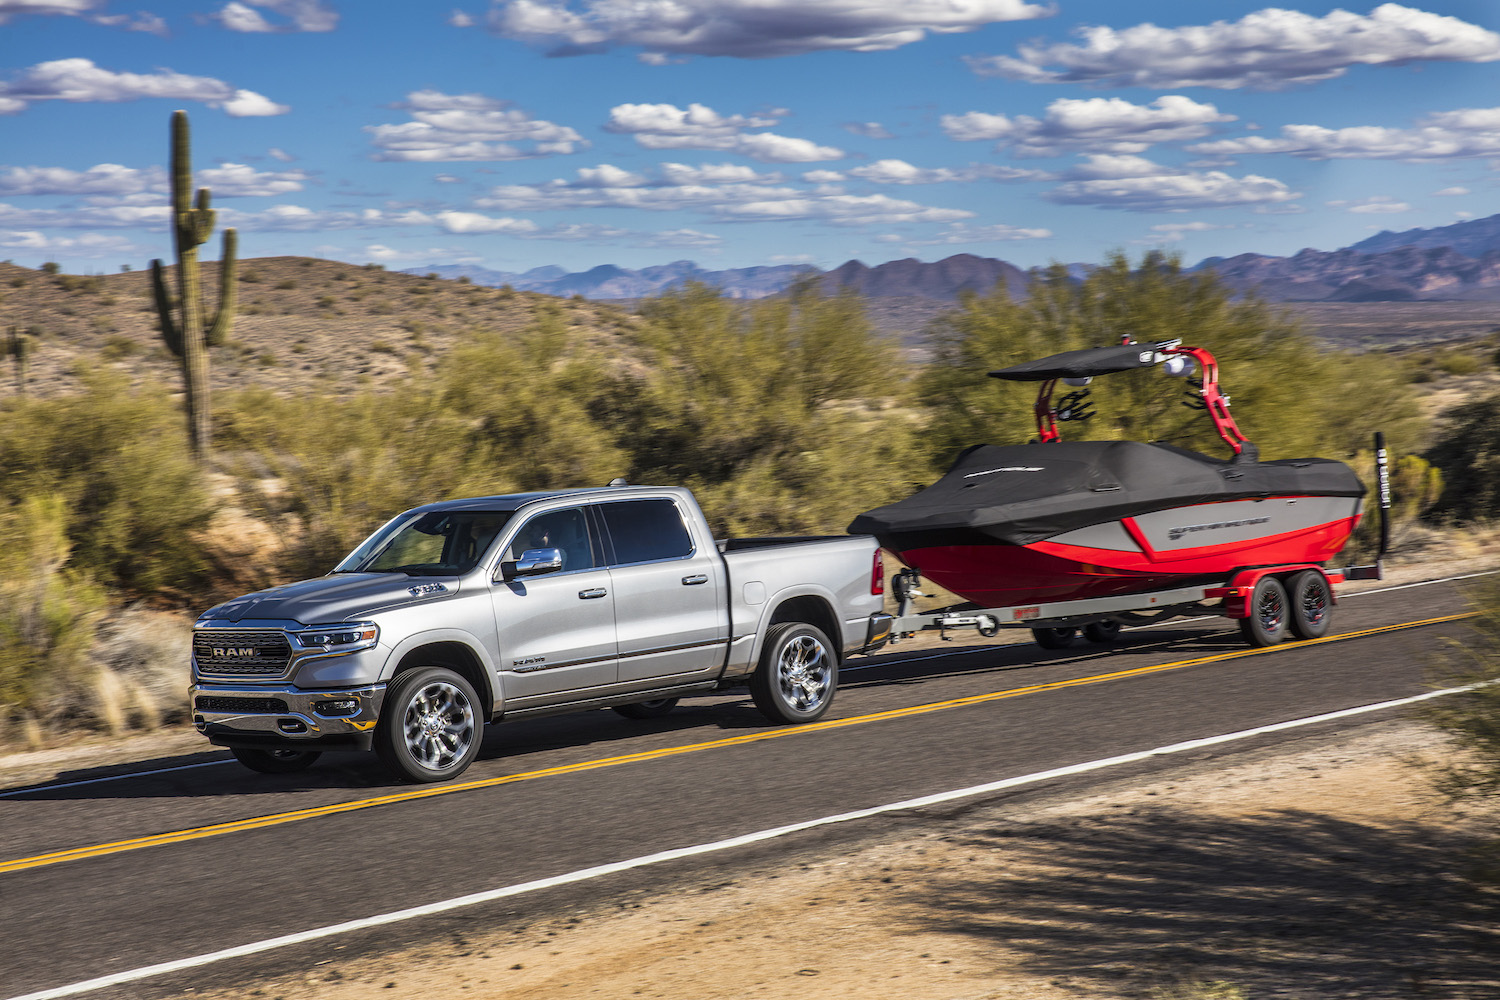 A silver 2022 Ram 1500 towing a boat.